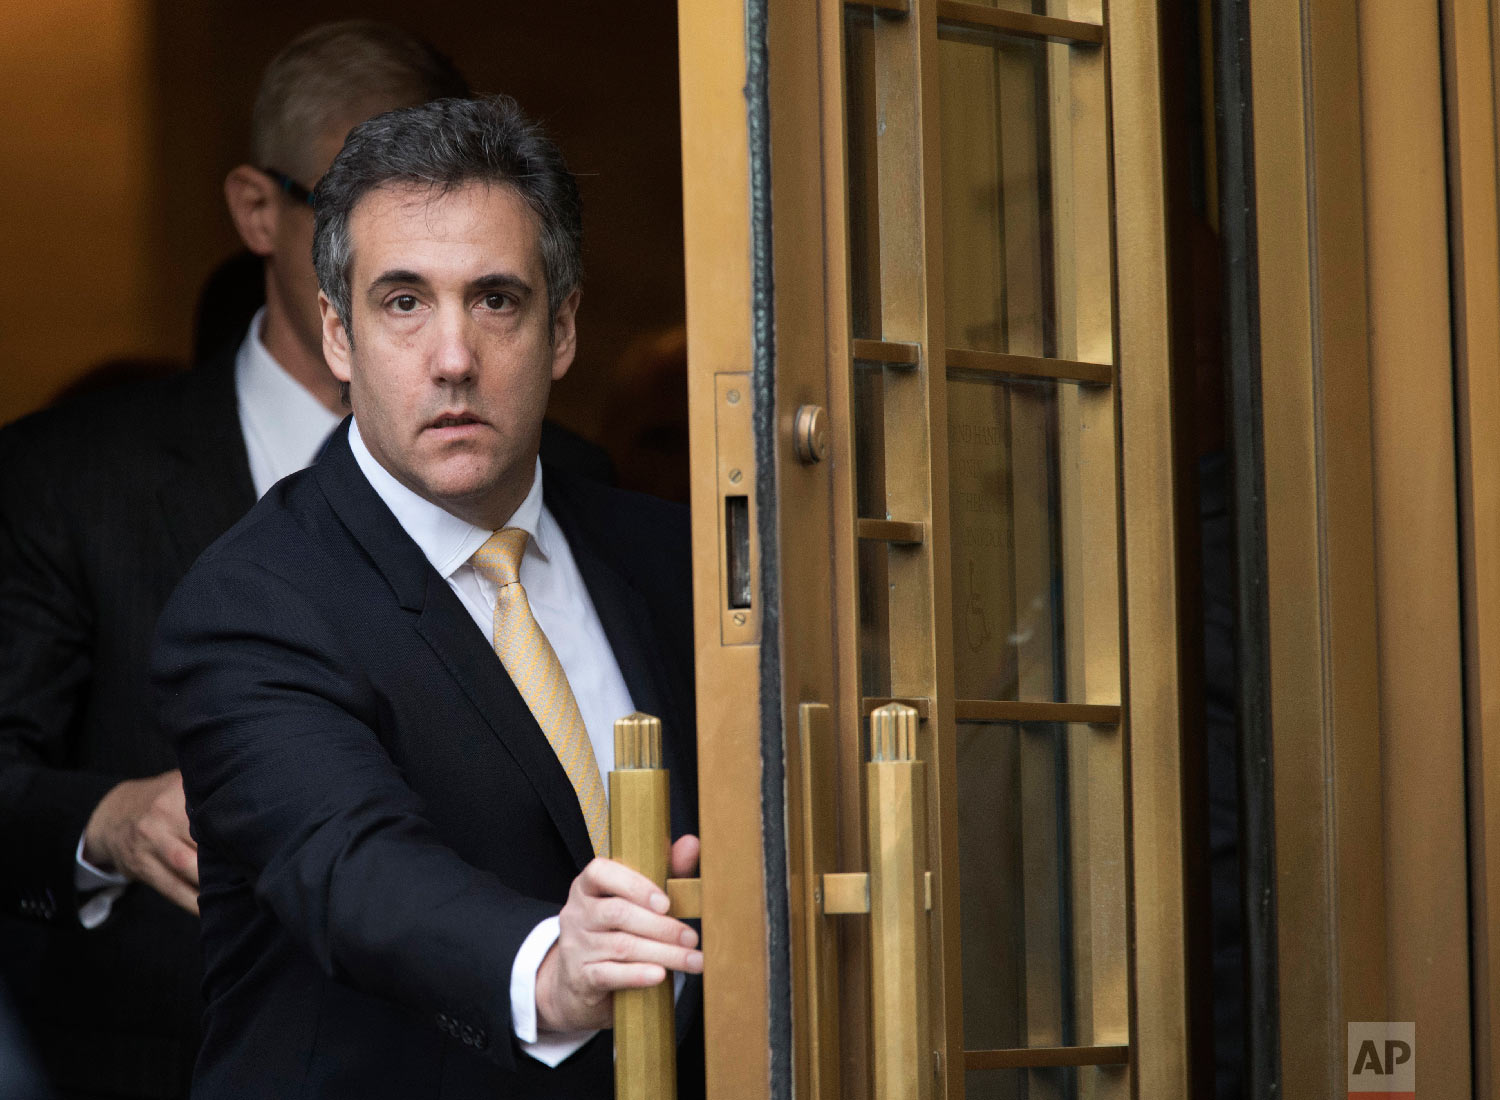  Michael Cohen leaves Federal court in New York on Aug. 21, 2018, after pleading guilty to charges including campaign finance fraud stemming from hush money payments to porn actress Stormy Daniels and ex-Playboy model Karen McDougal. (AP Photo/Mary A